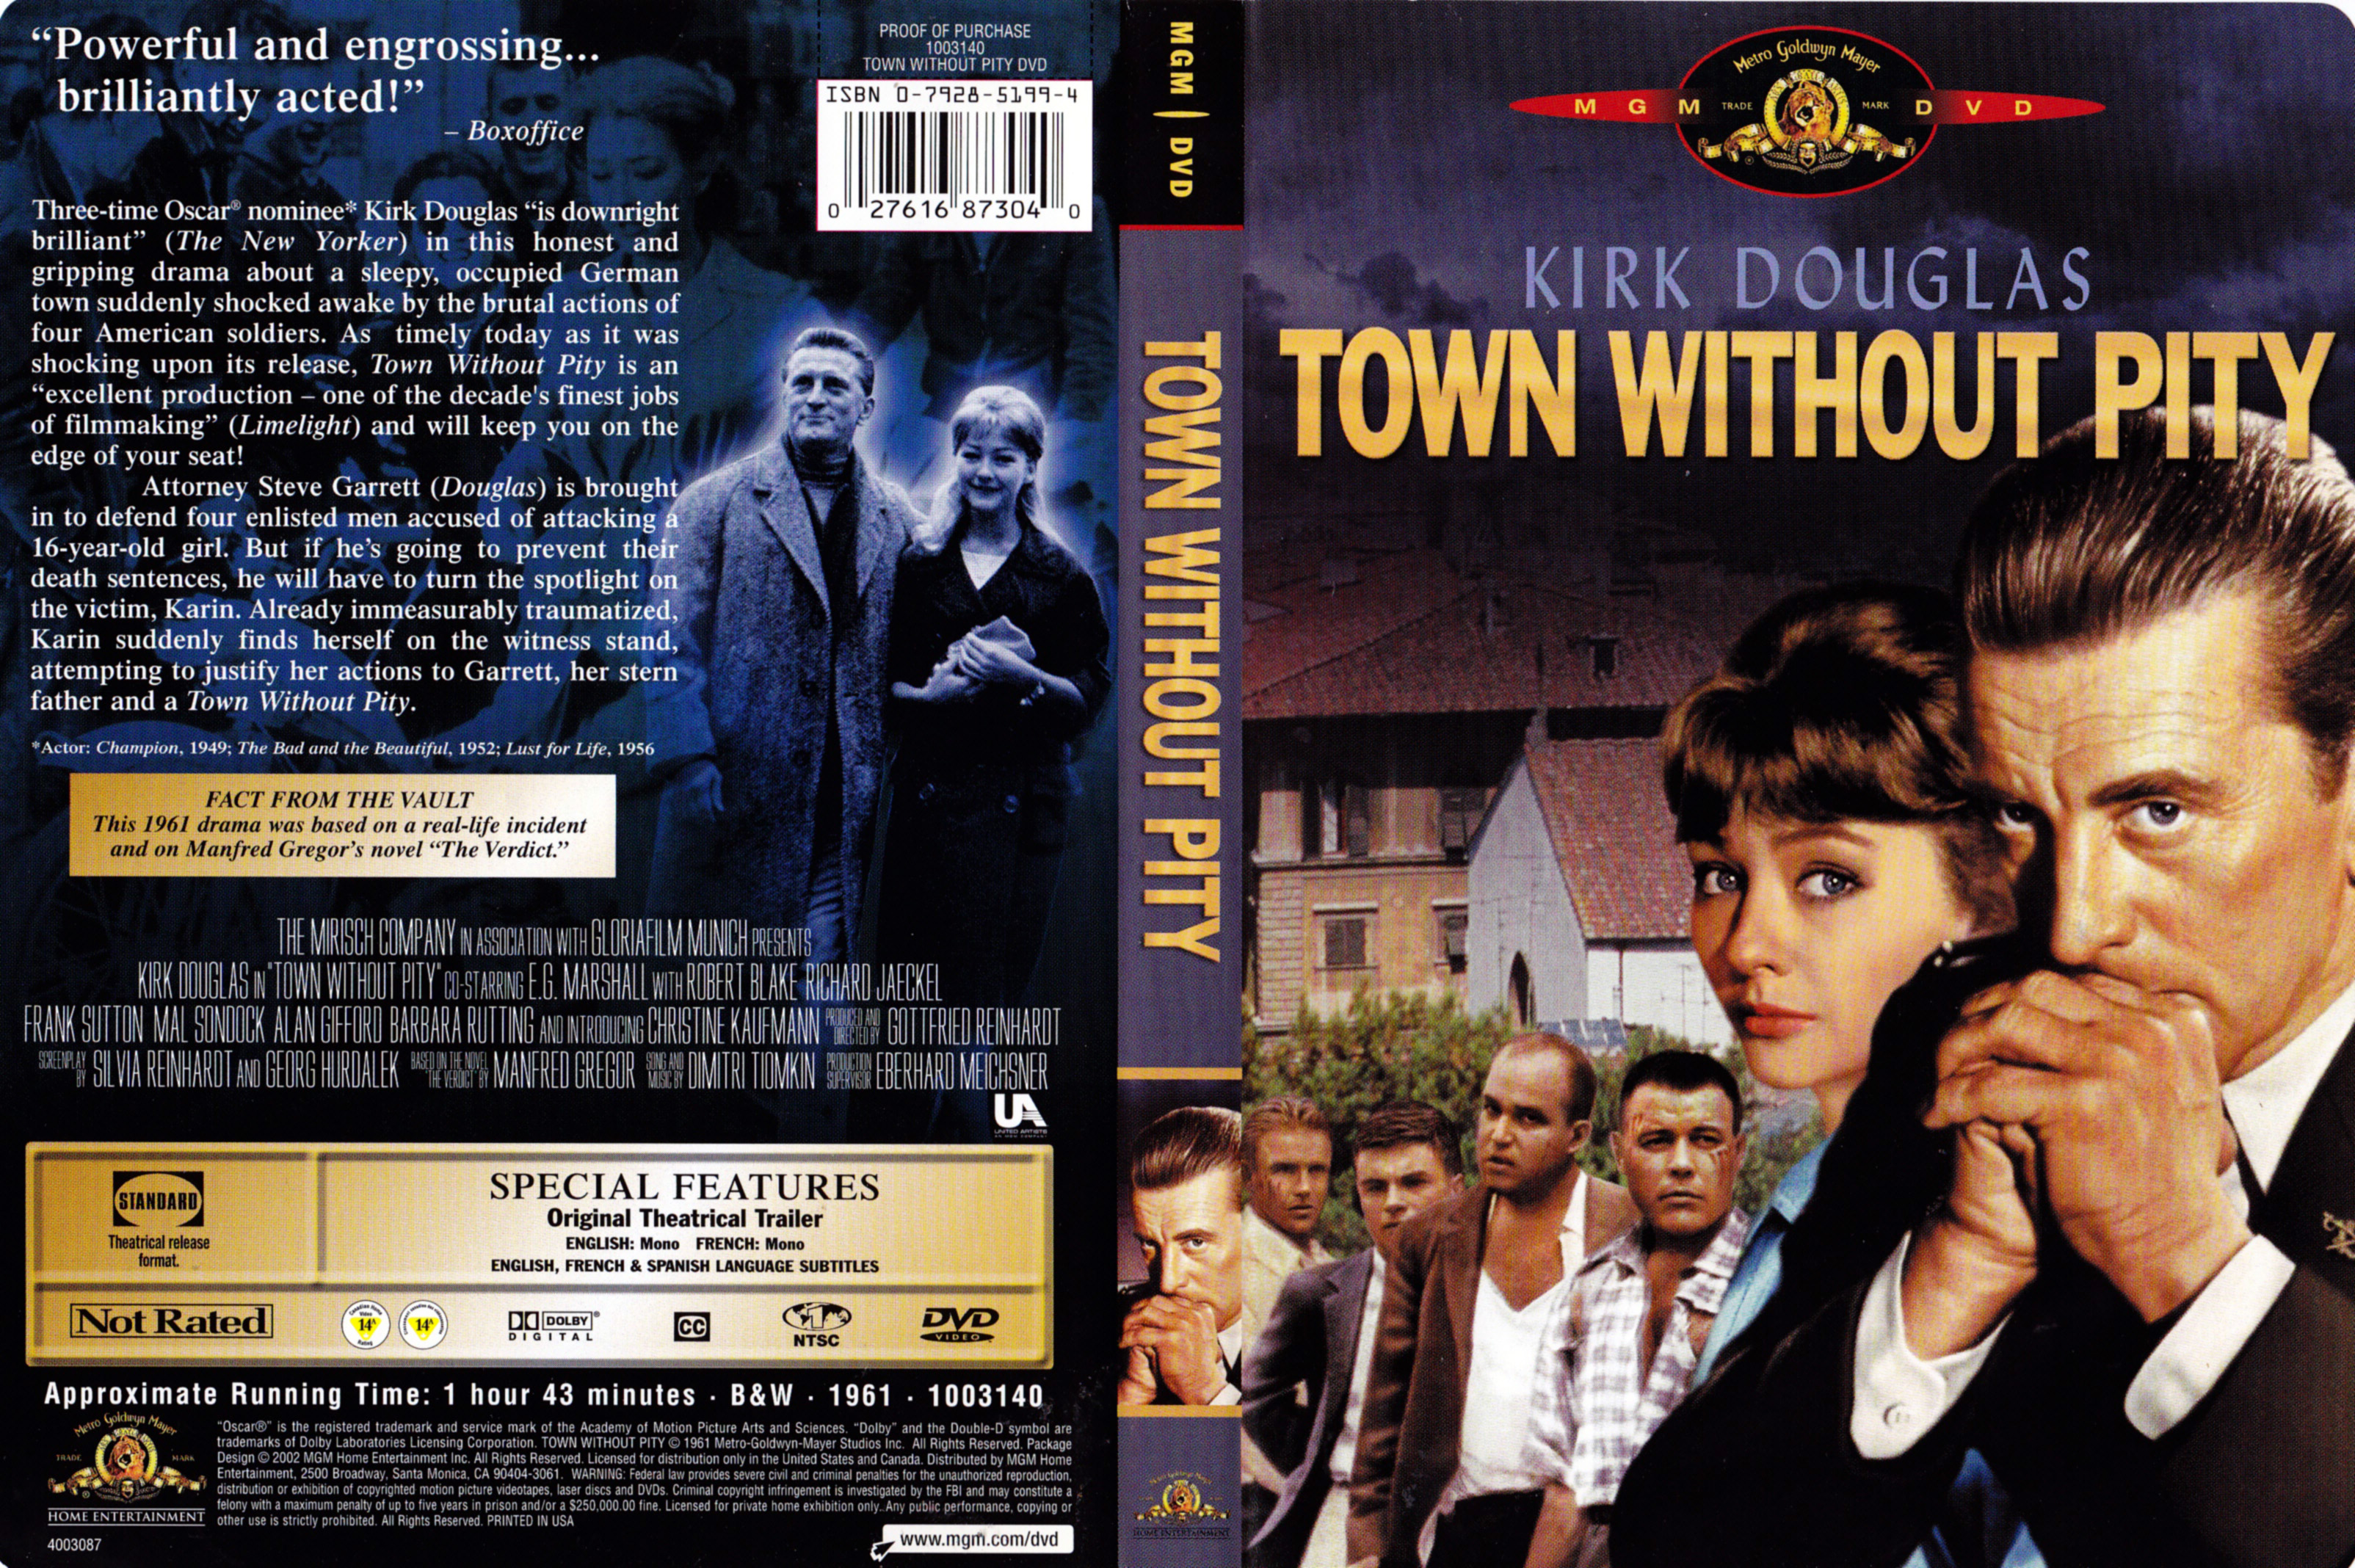 Jaquette DVD Town without pity Zone 1